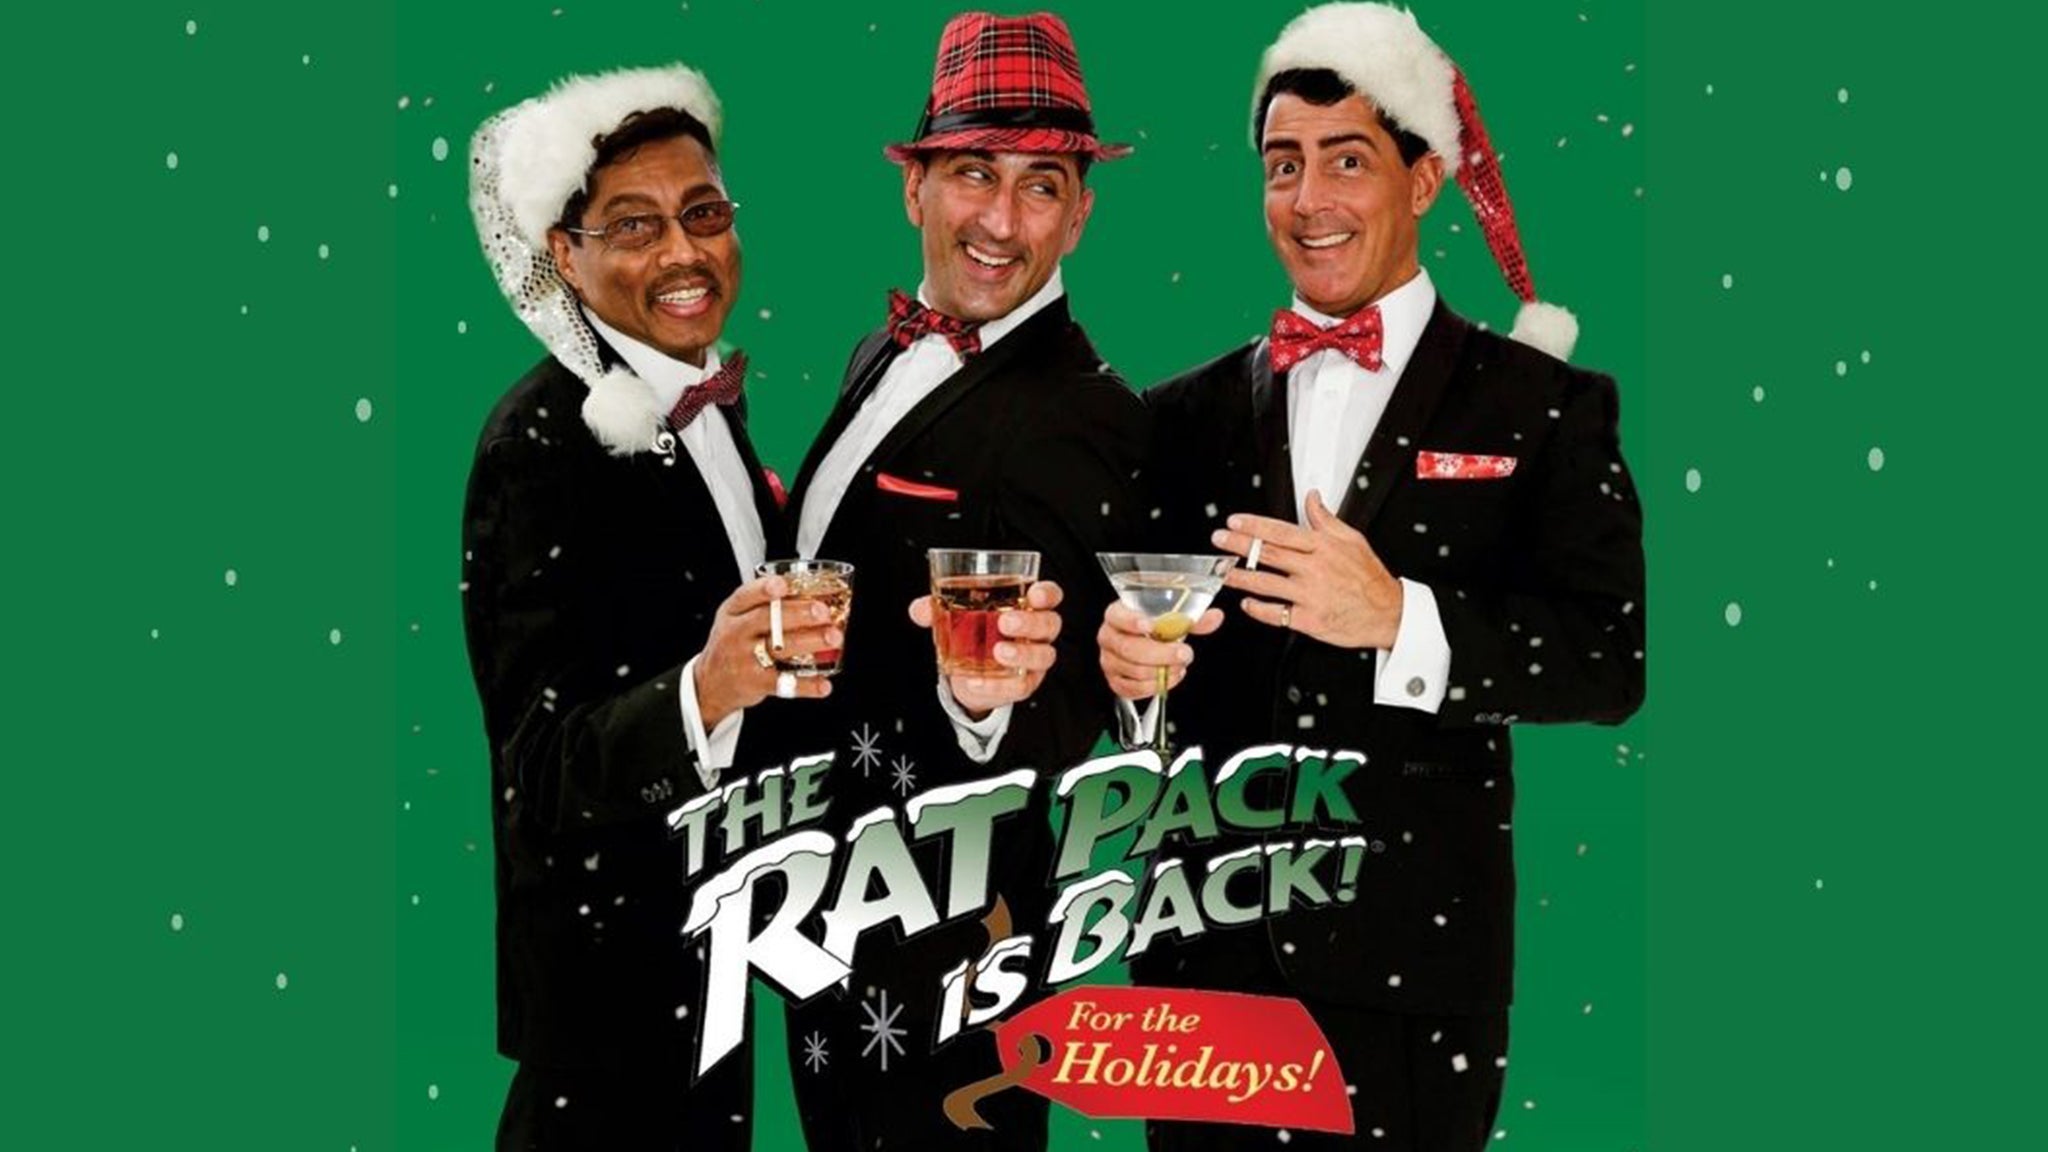 The Rat Pack is Back for The Holidays! presale password for show tickets in Elkhart, IN (The Lerner Theatre)